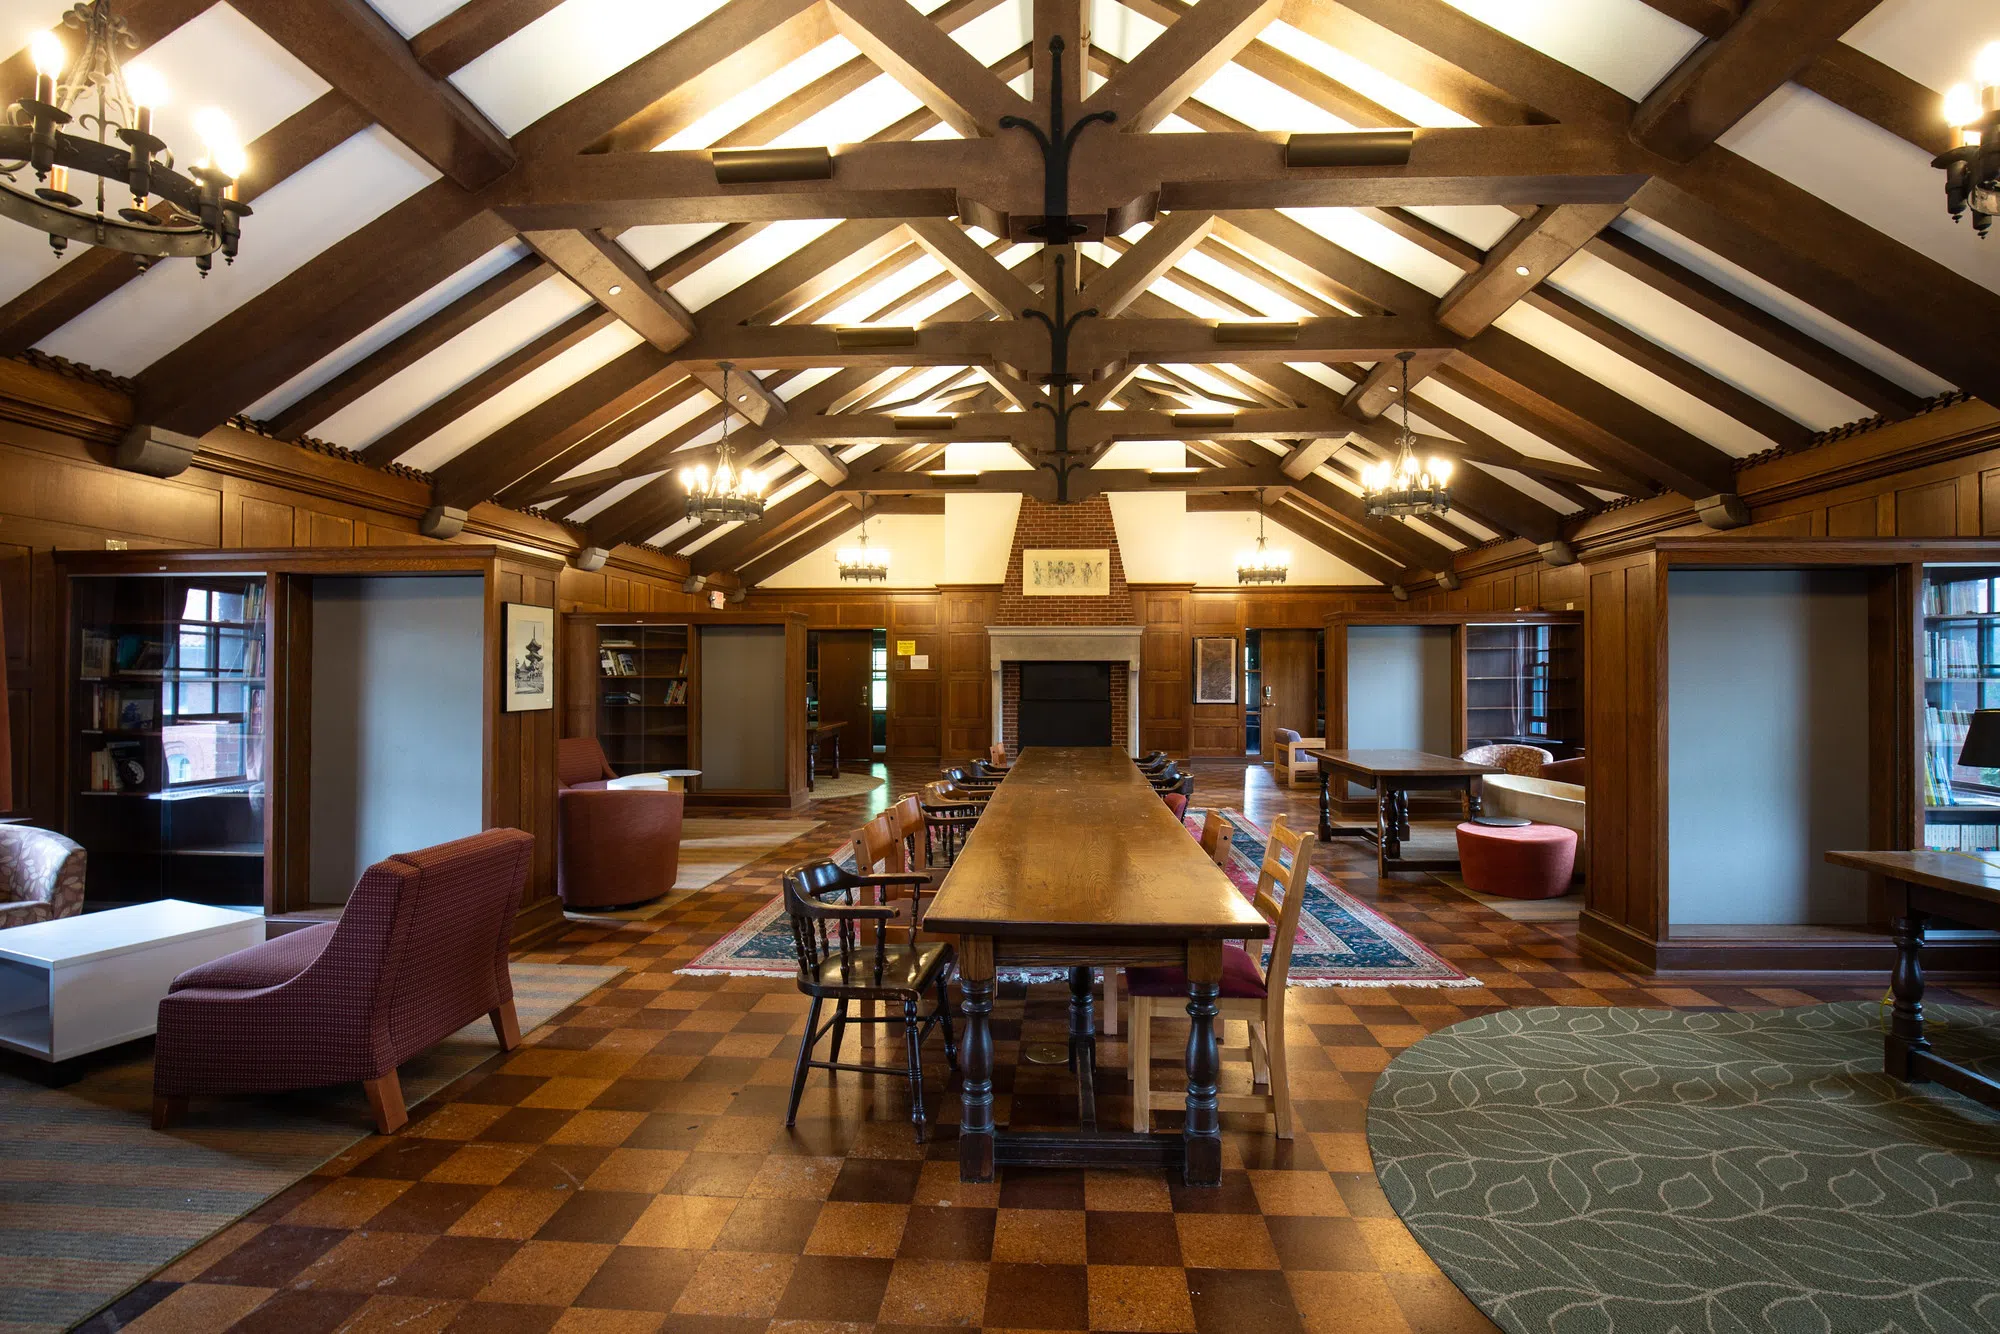 A large A frame library is lit with warm lighting and dark wood furniture.